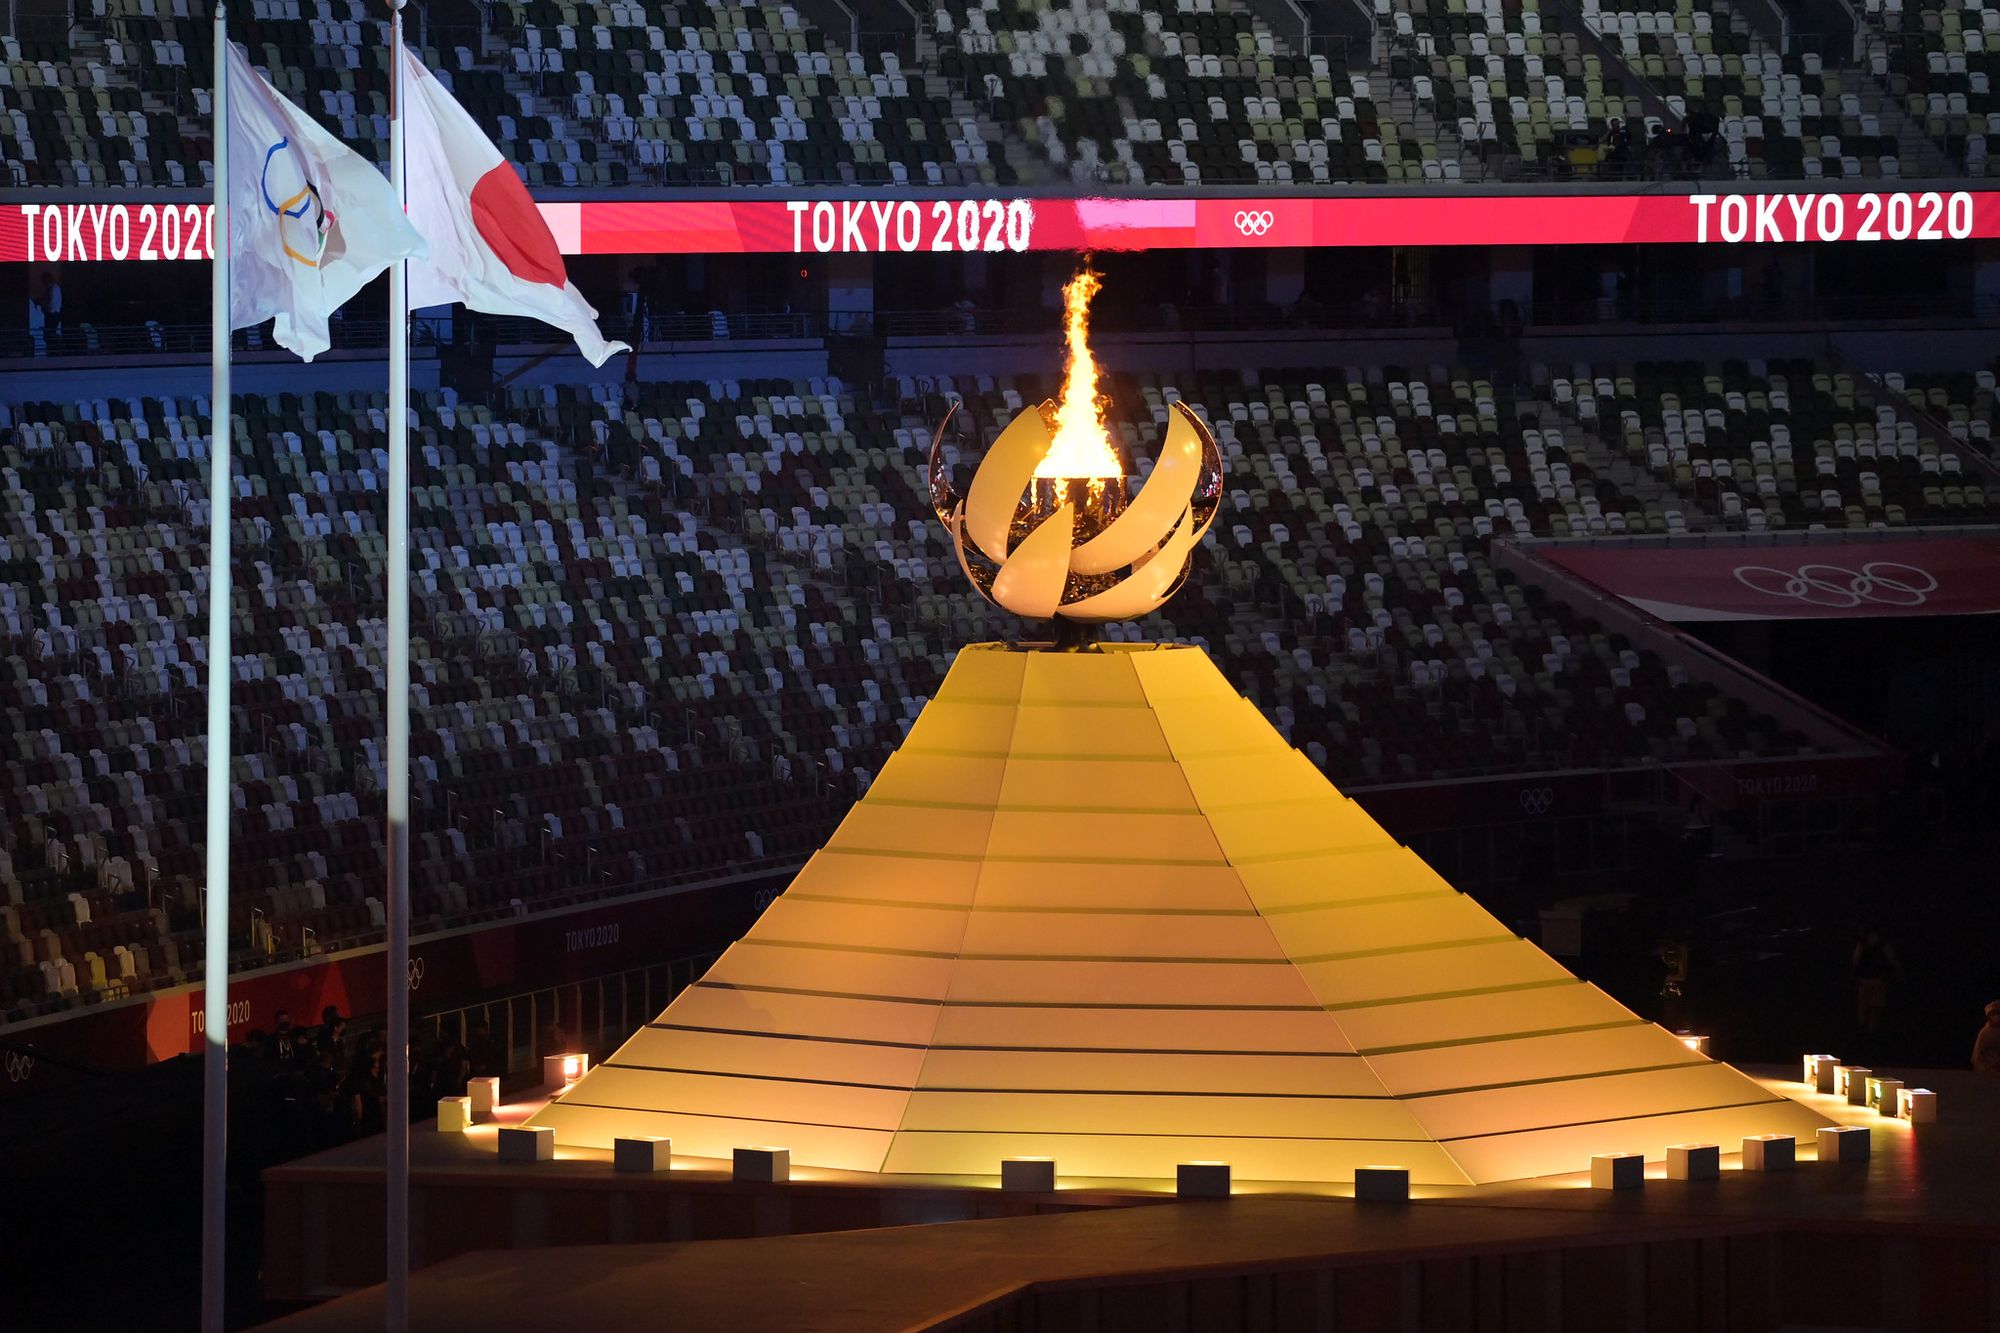 The Tokyo Olympic flame burns in an empty arena.